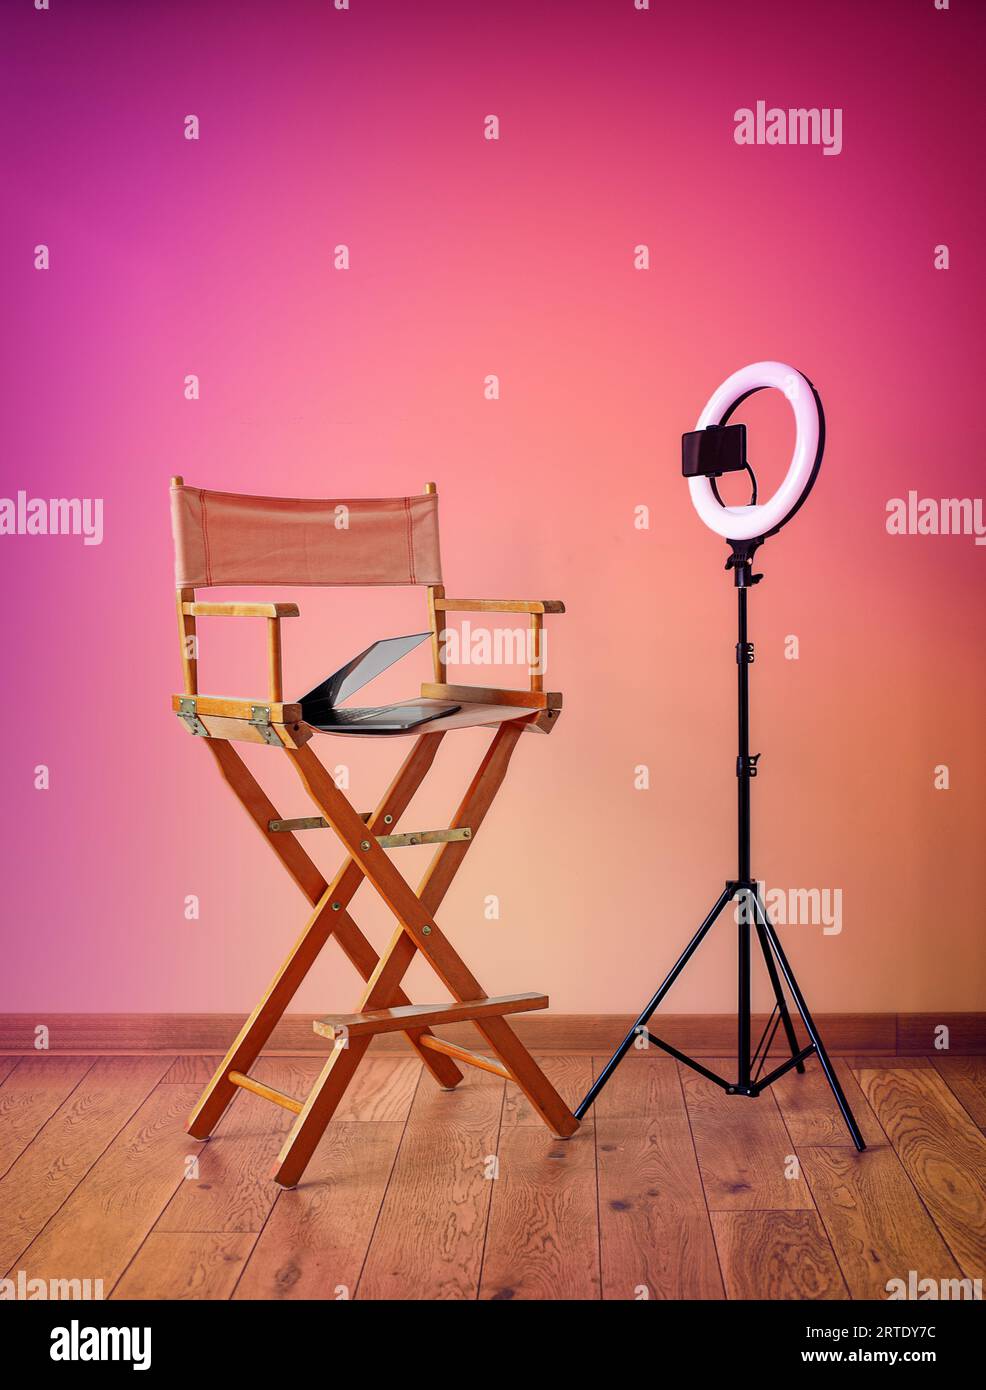 Director's chair, ring lights, digital camera with laptop and hats on colorful background with recording equipment Stock Photo